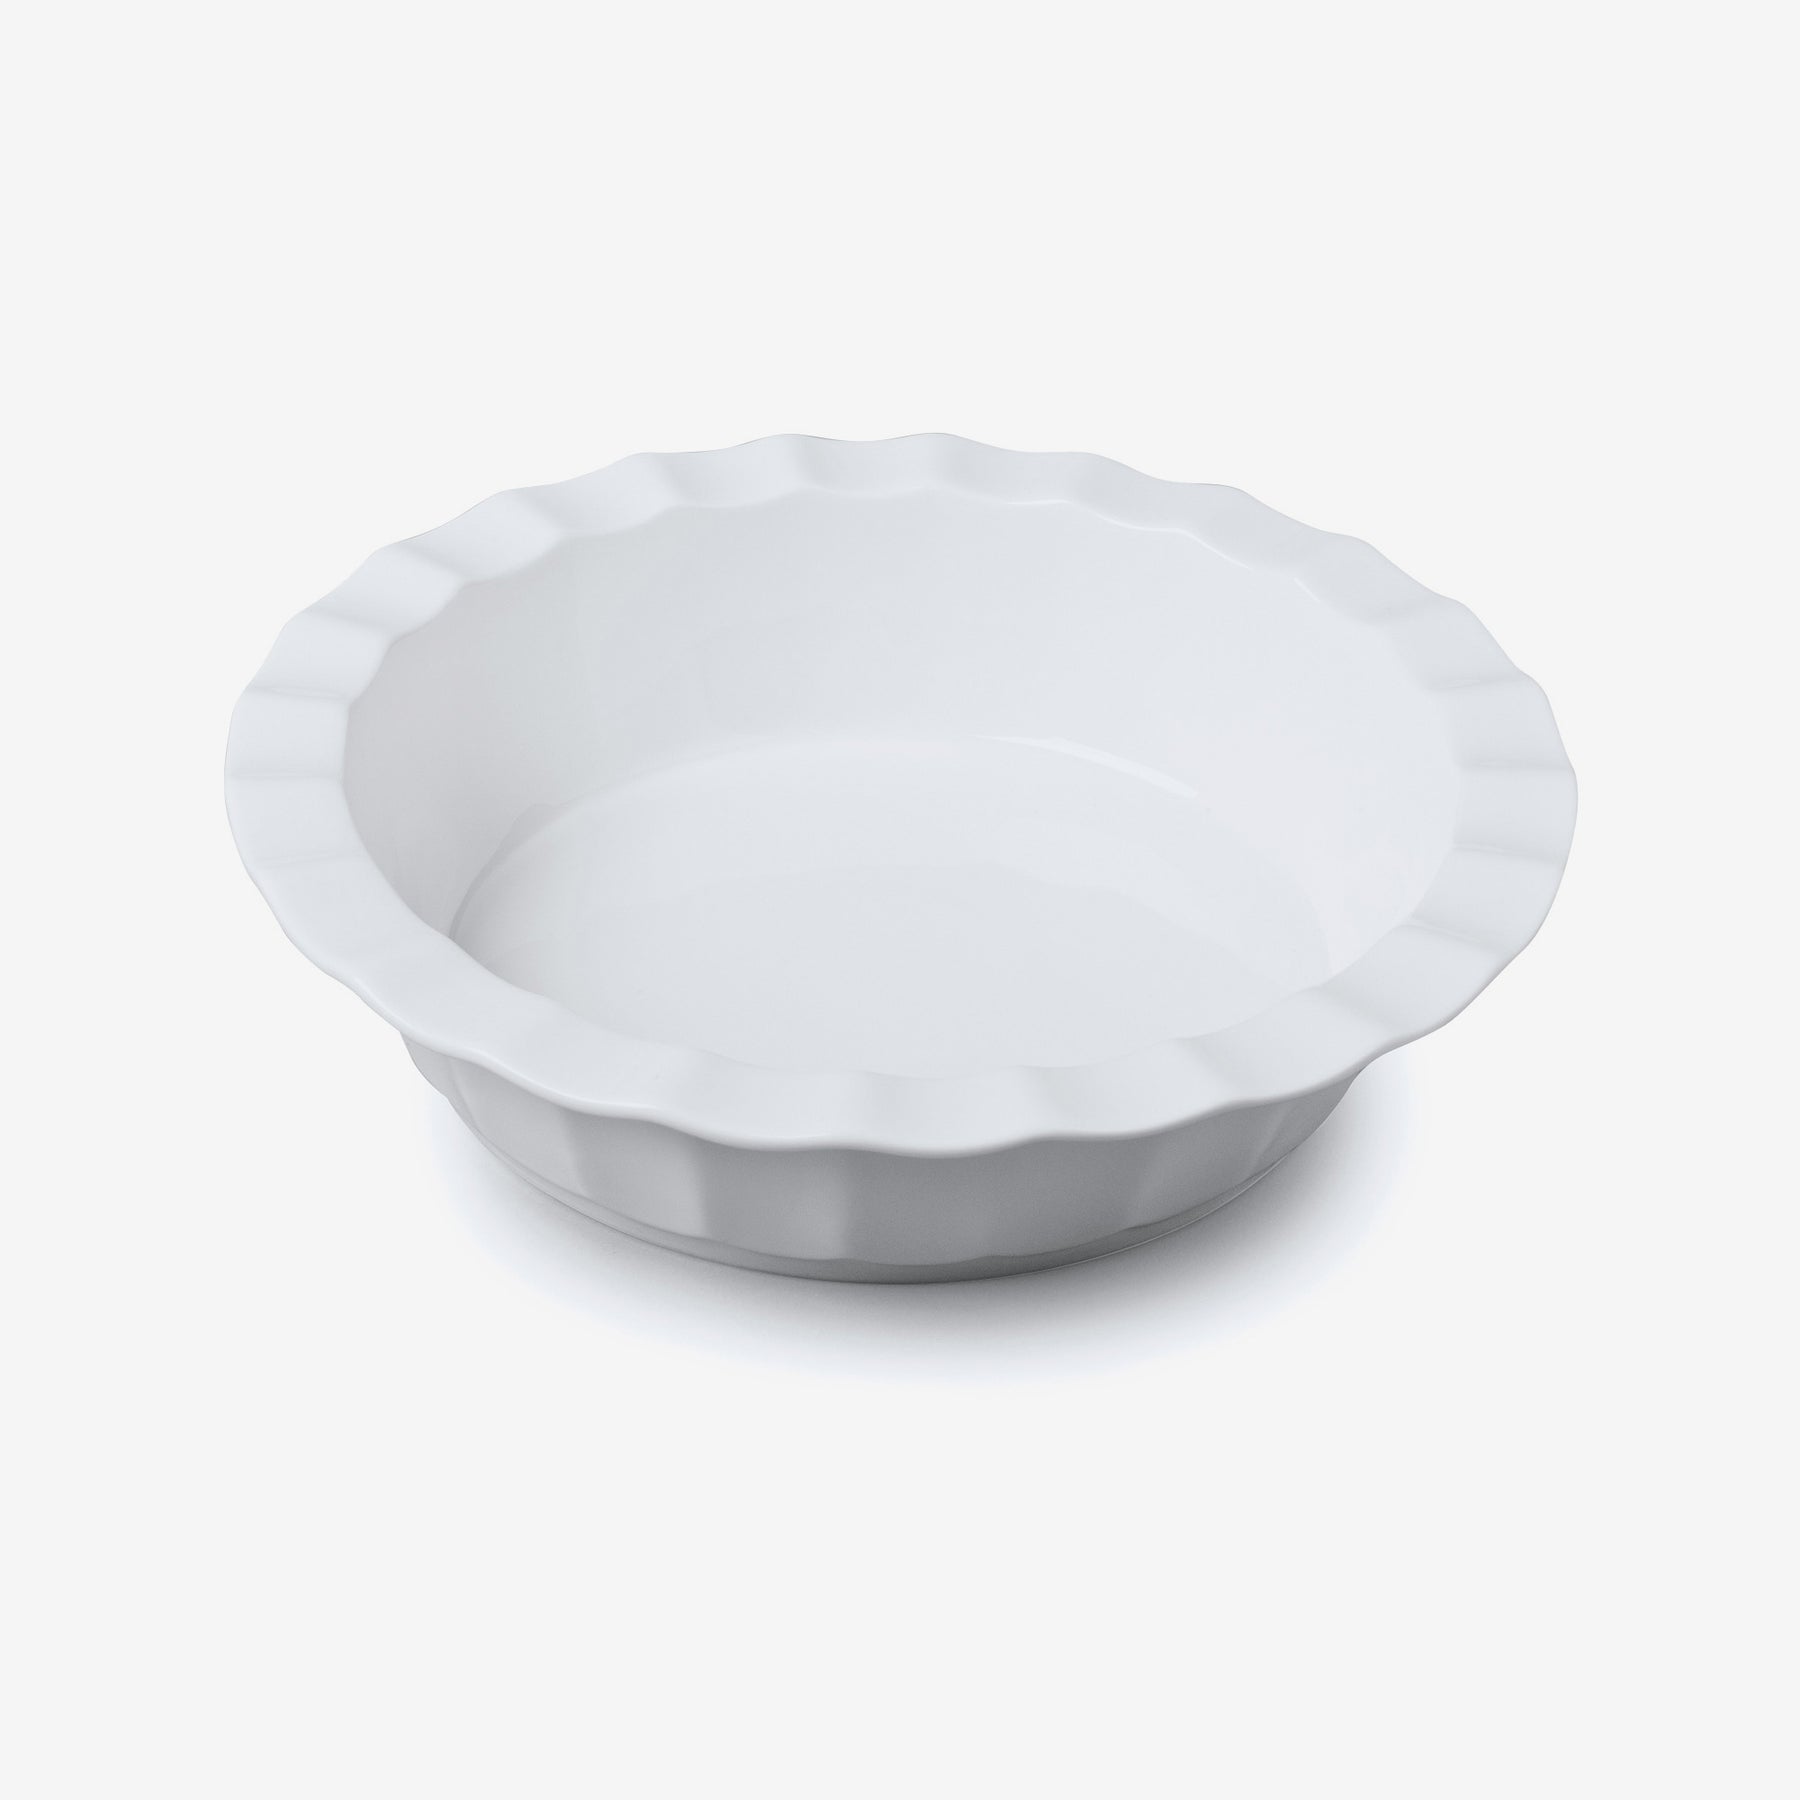 Porcelain Deep Round Crinkle Rim Pie Dish, Available in 2 Sizes